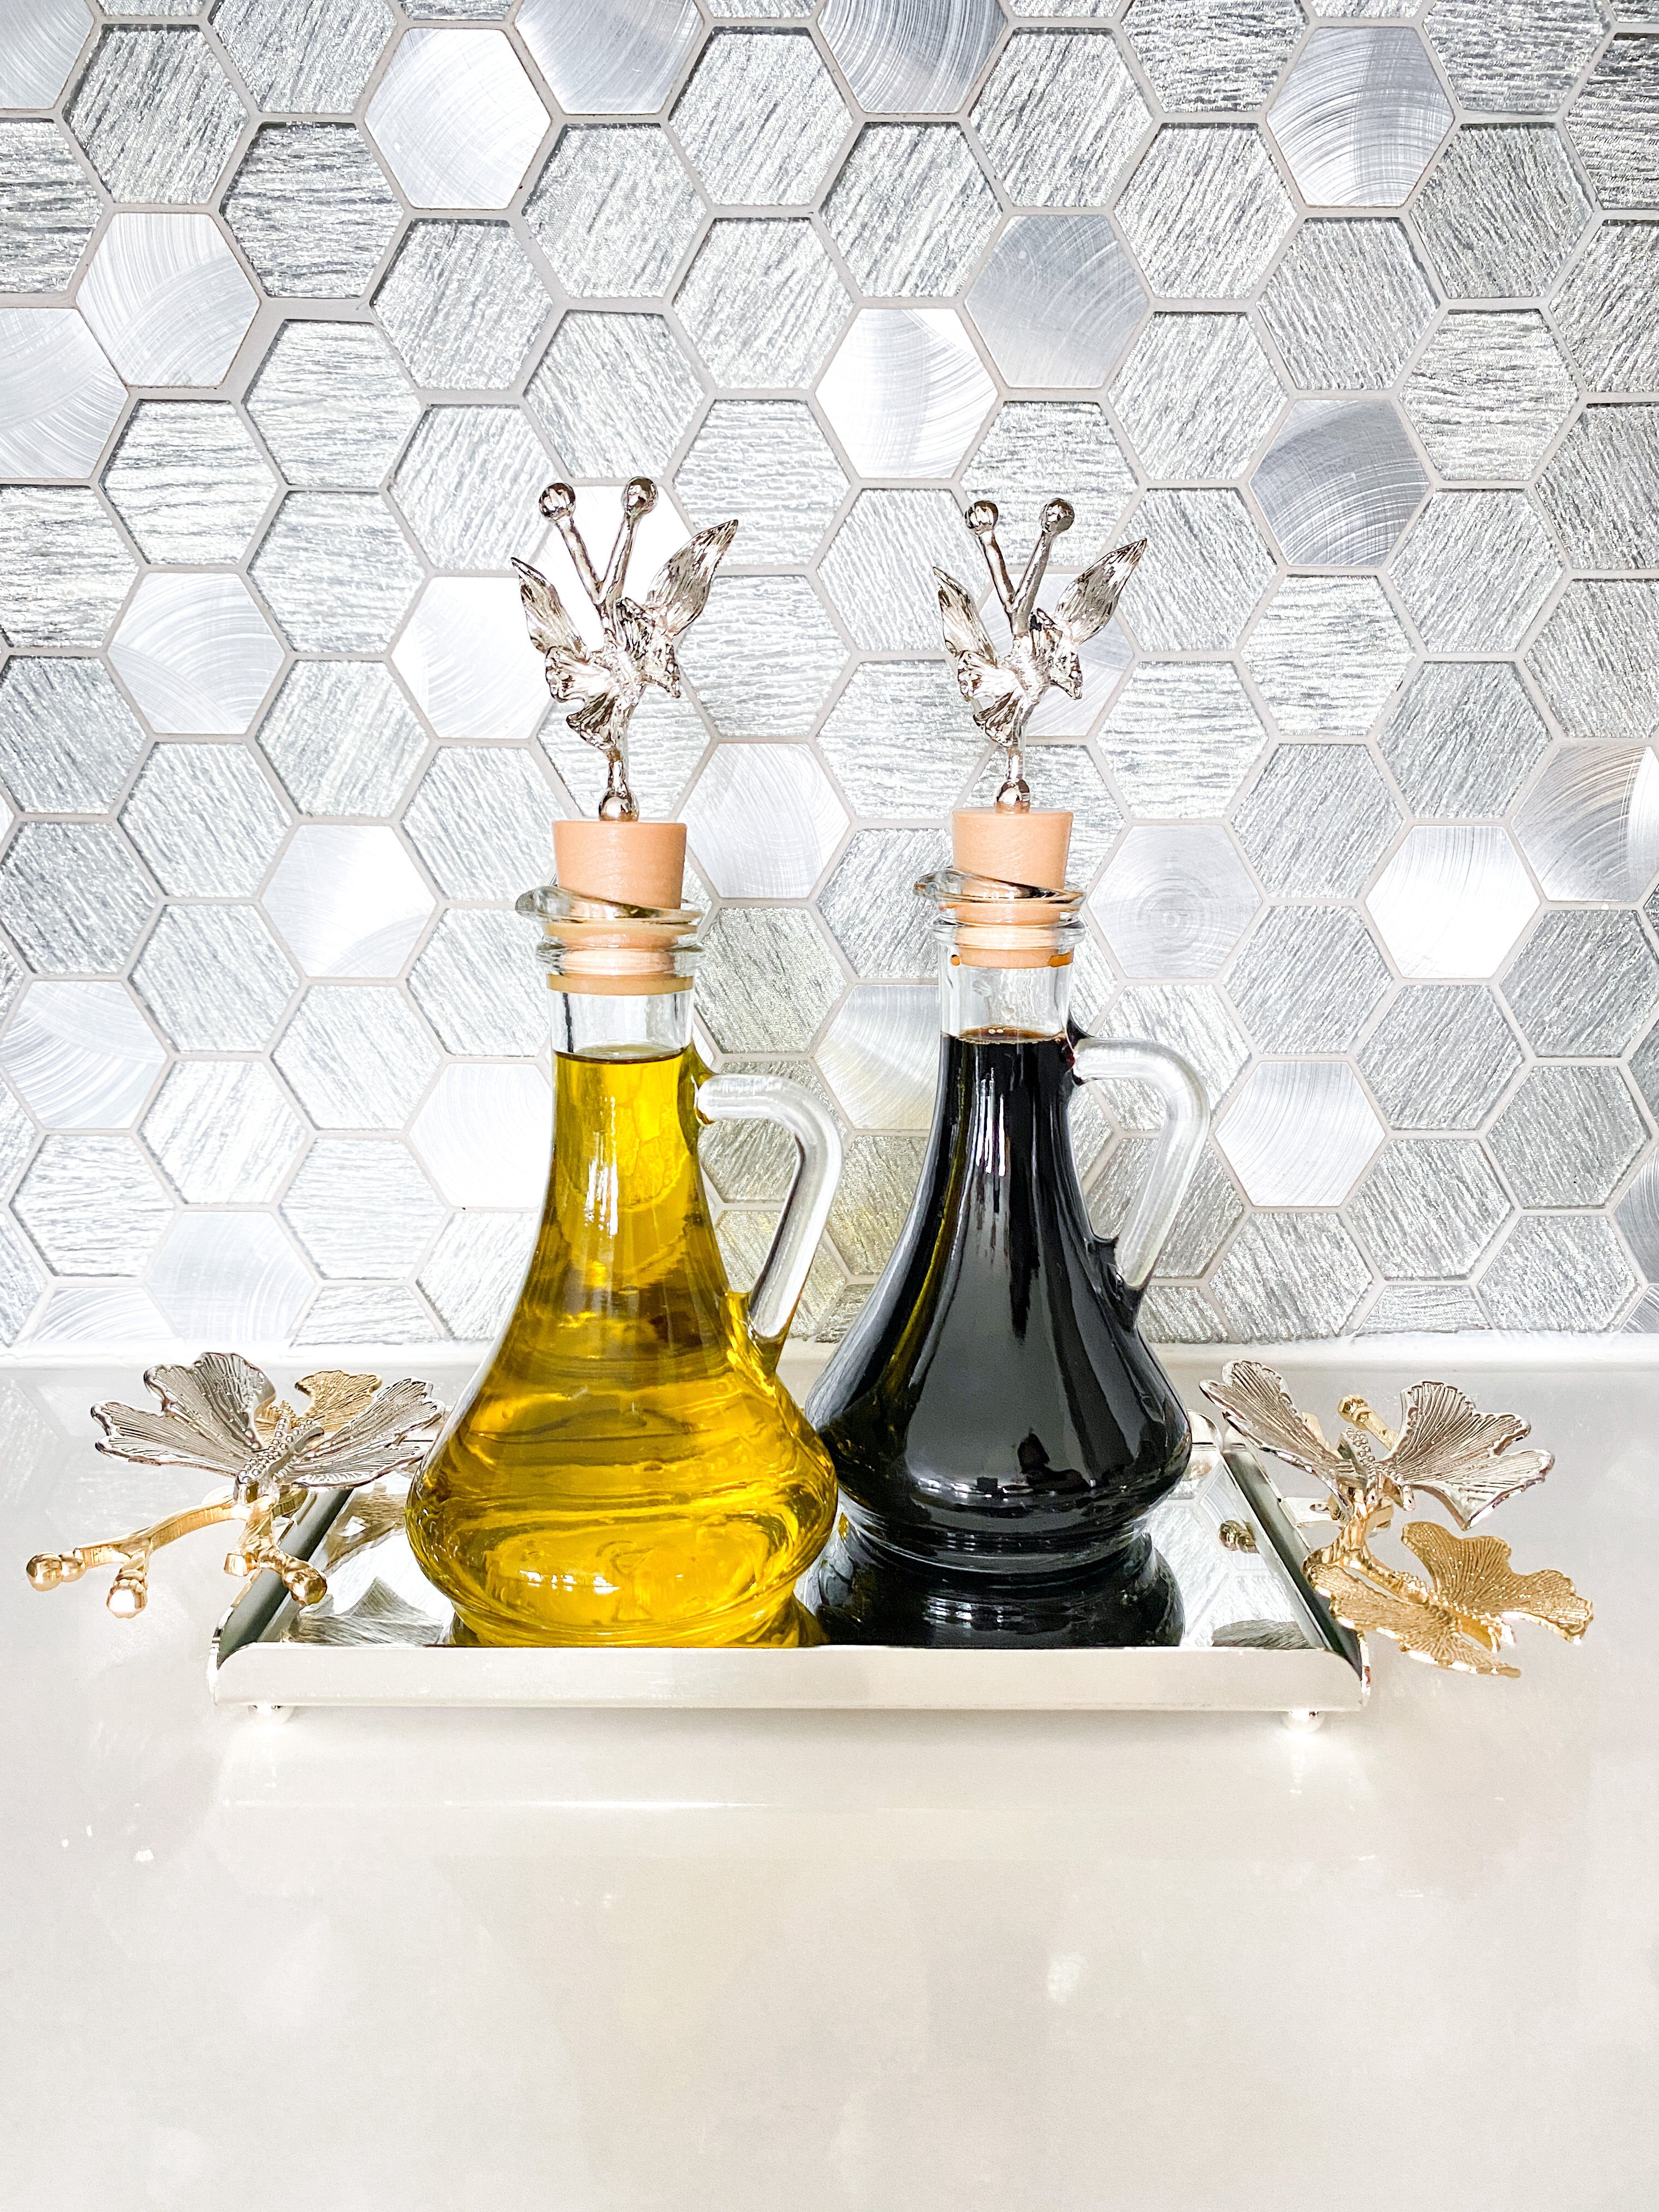 Olive Oil Bottle Dispenser with Silver & Gold Butterfly Details - HTS HOME DECOR